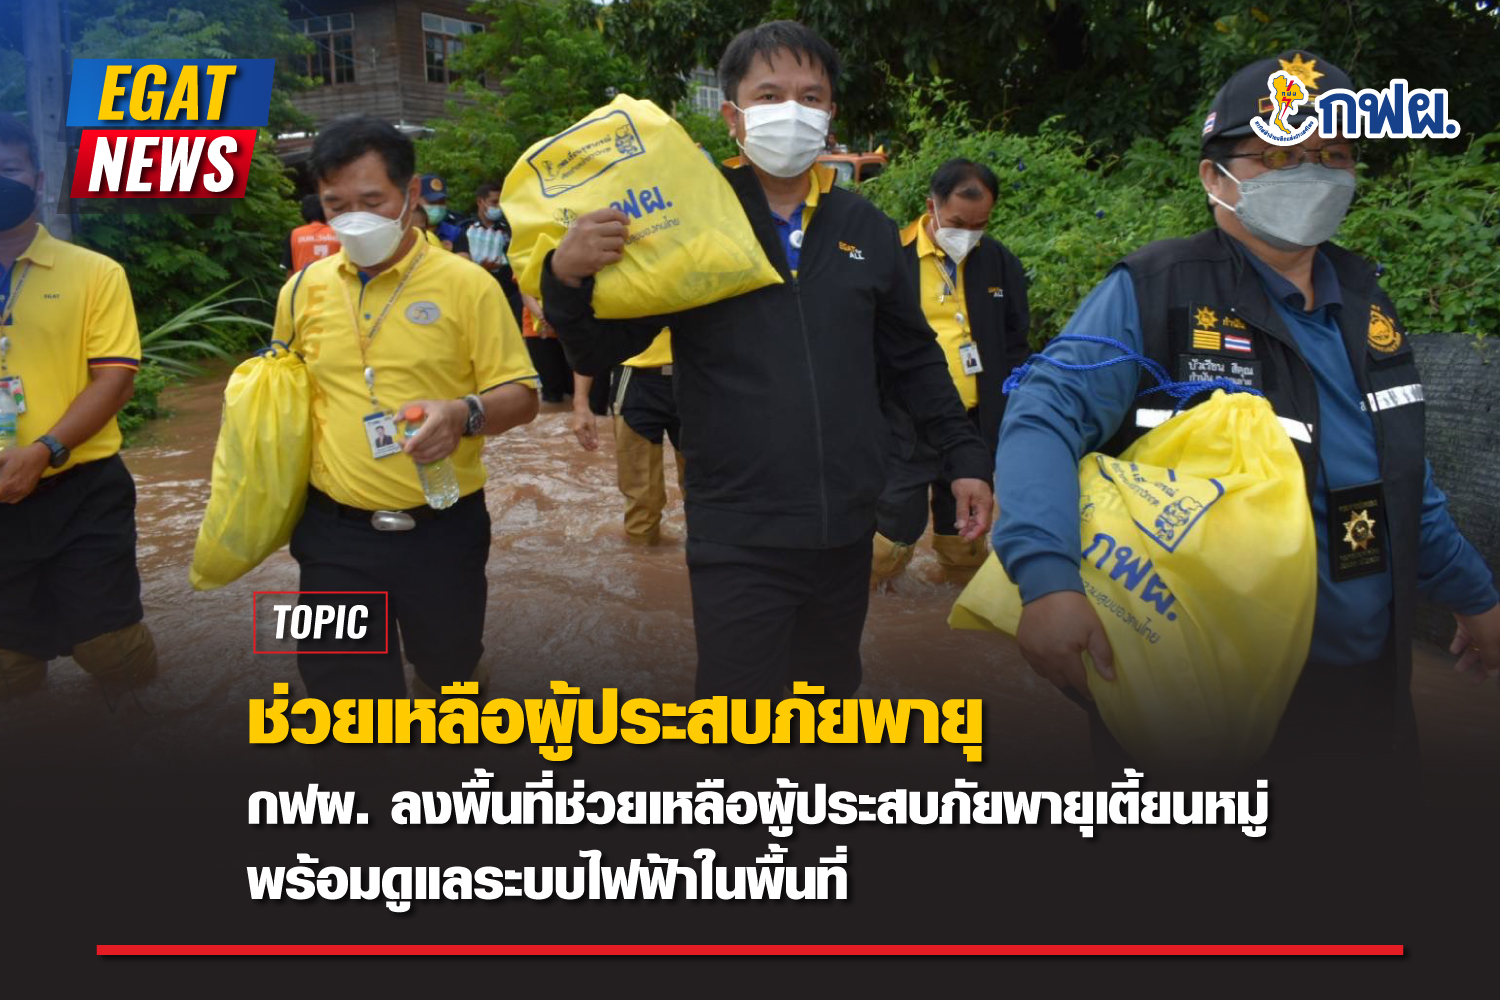 EGAT helps flood victims of typhoon Dianmu and ensures power system security